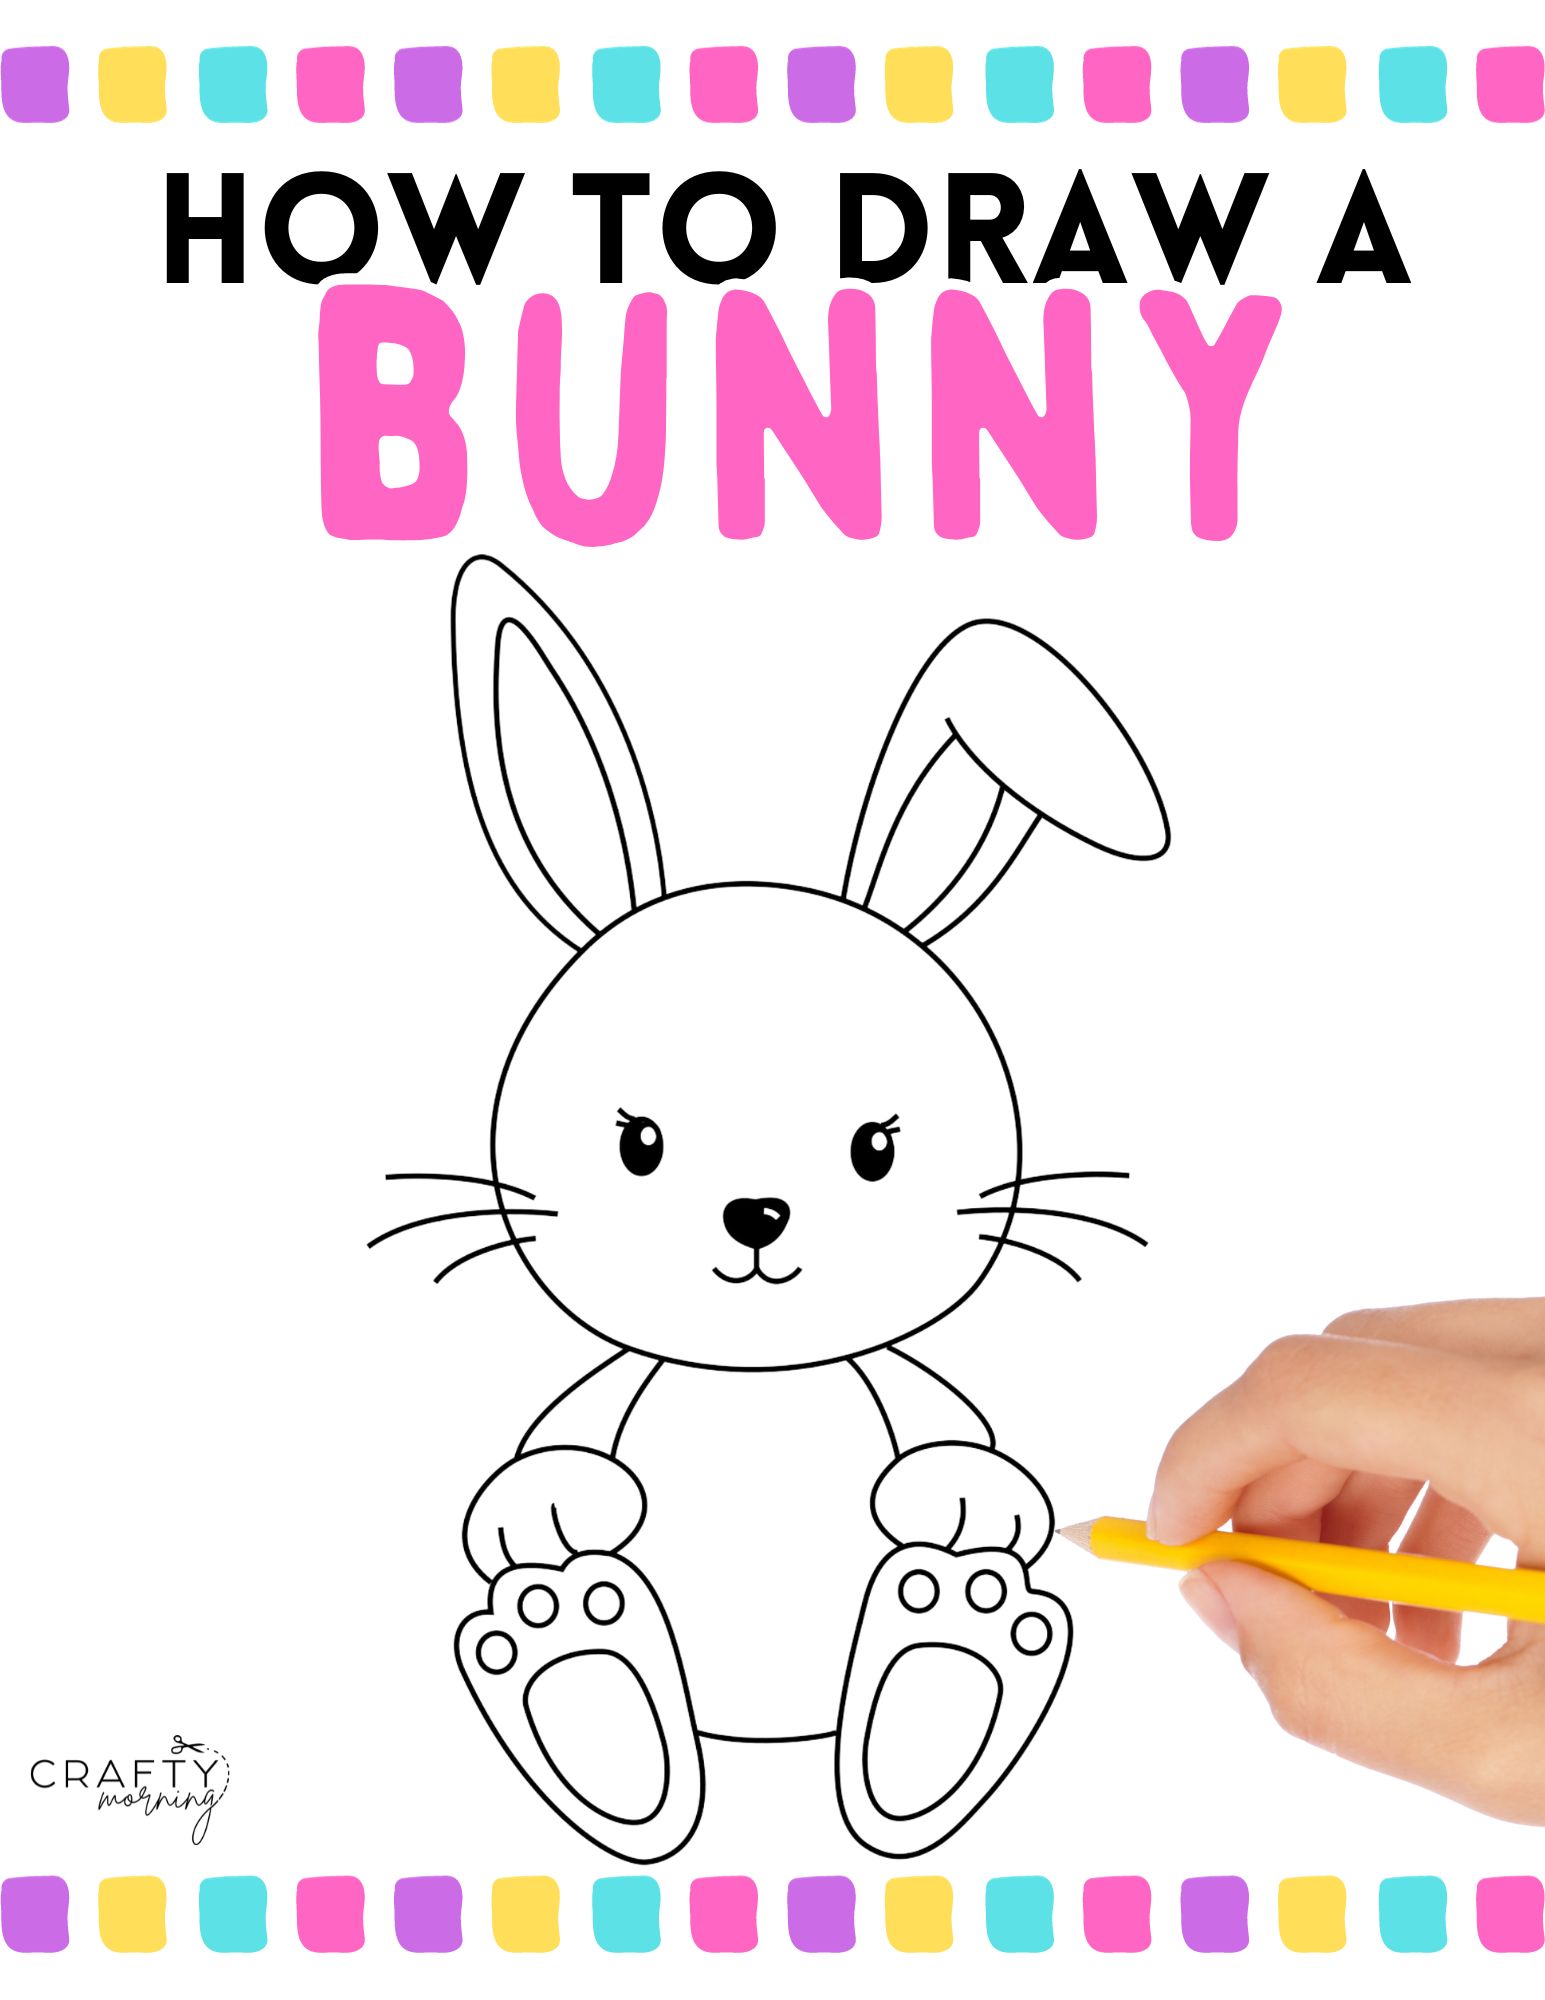 bunny drawing how to step by step